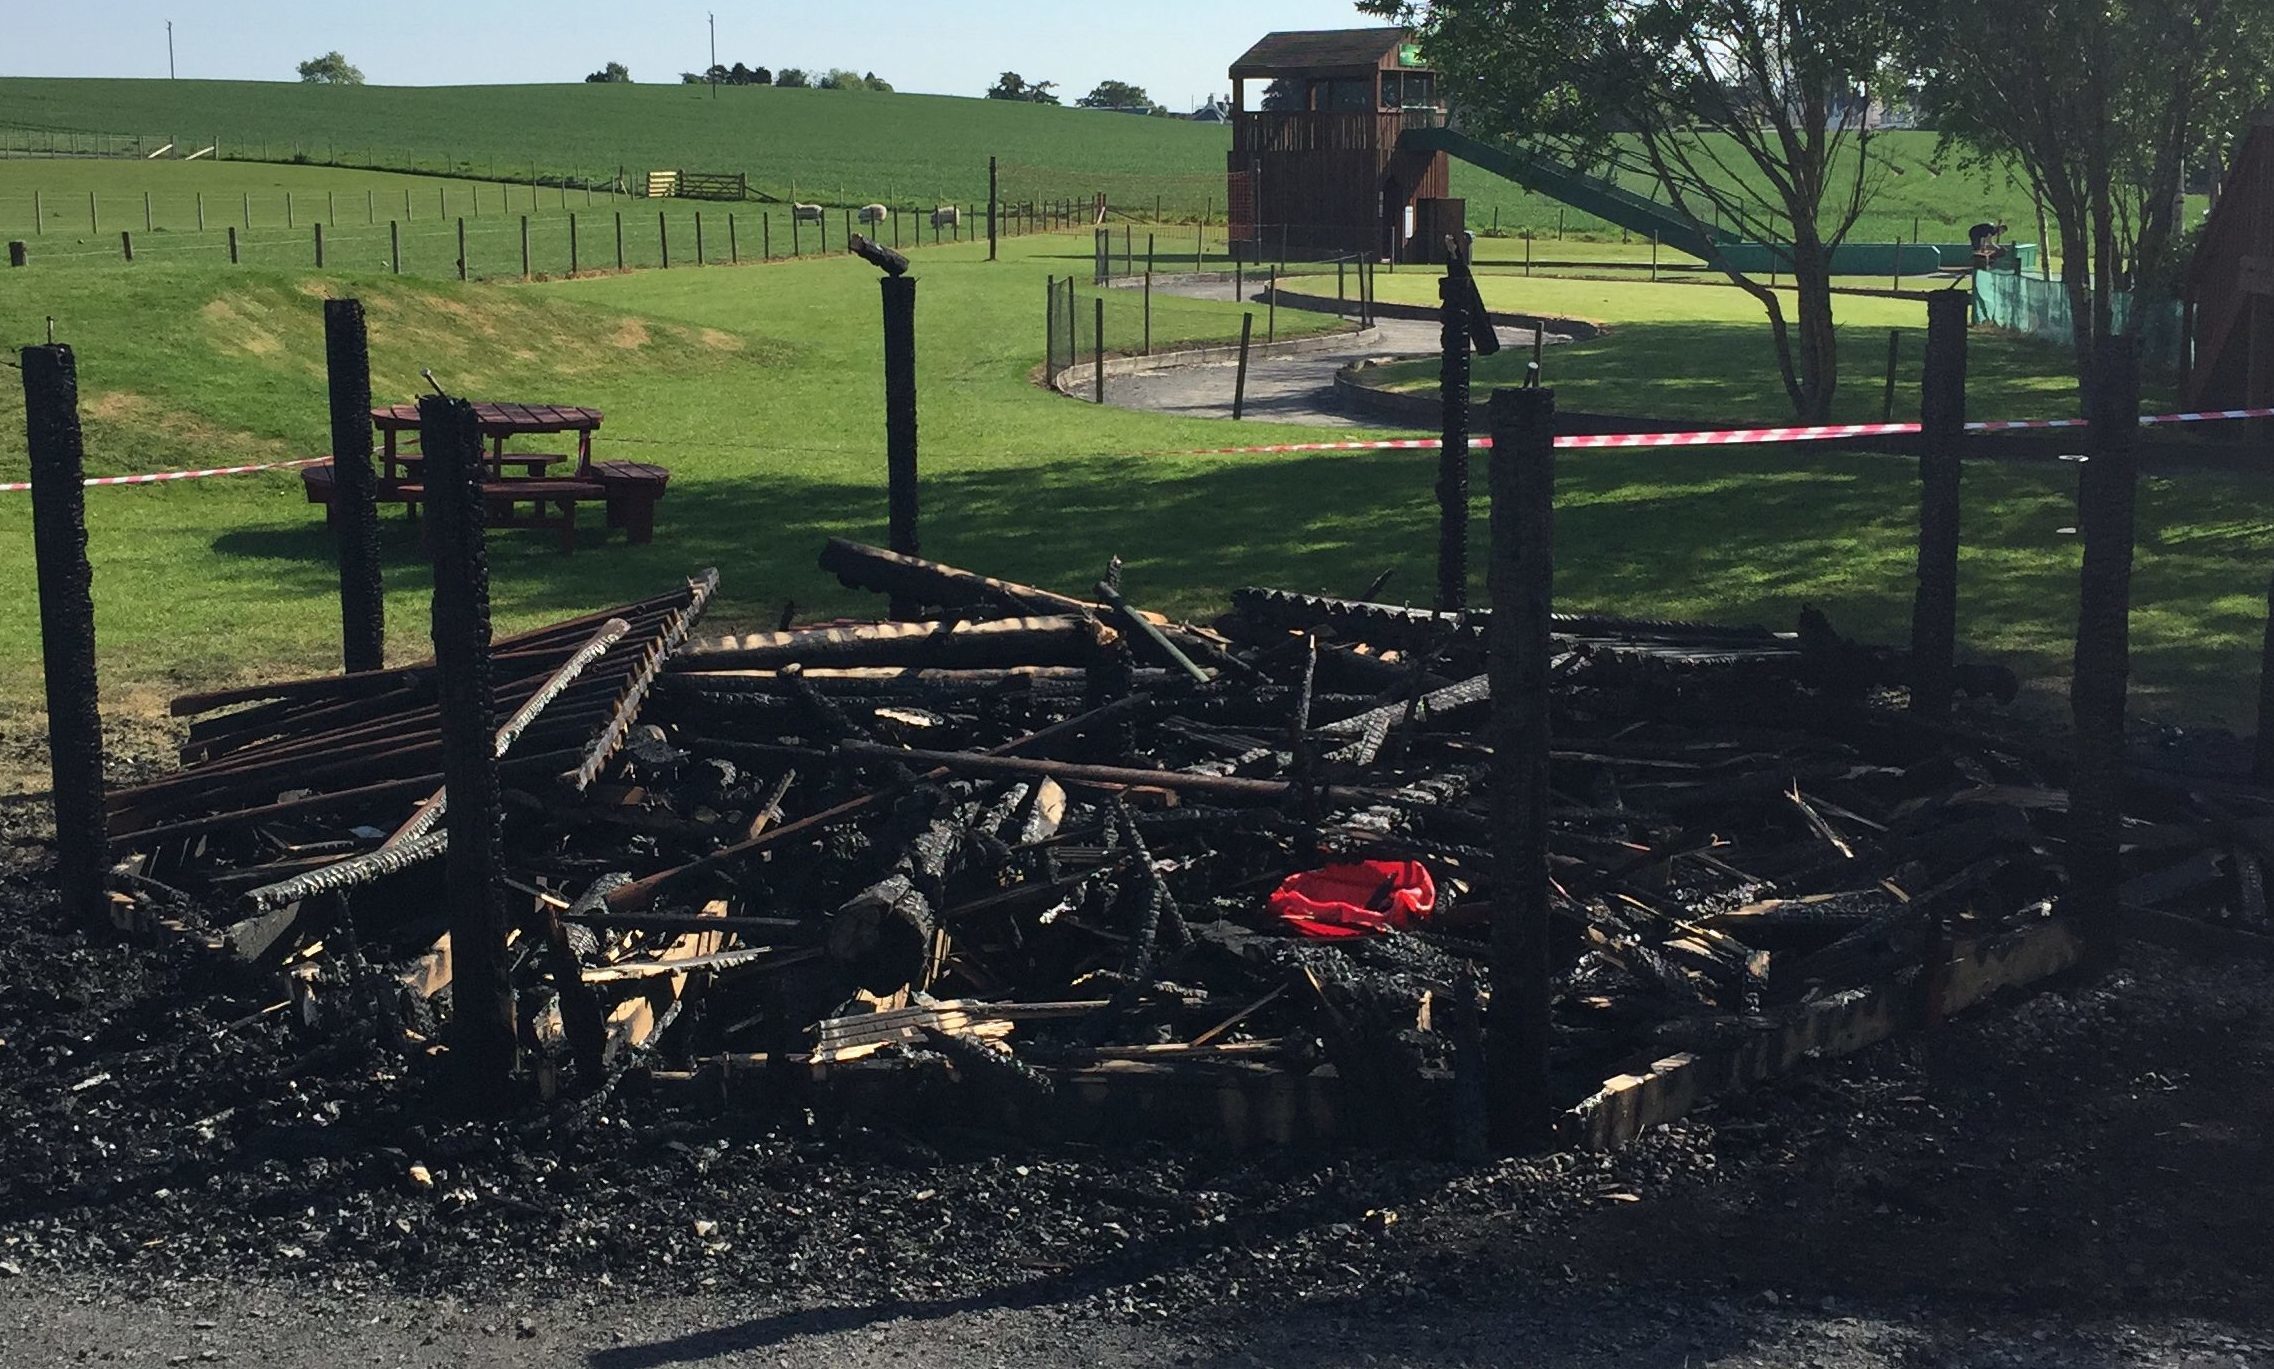 The burnt-out children's wigwam at the adventure park.